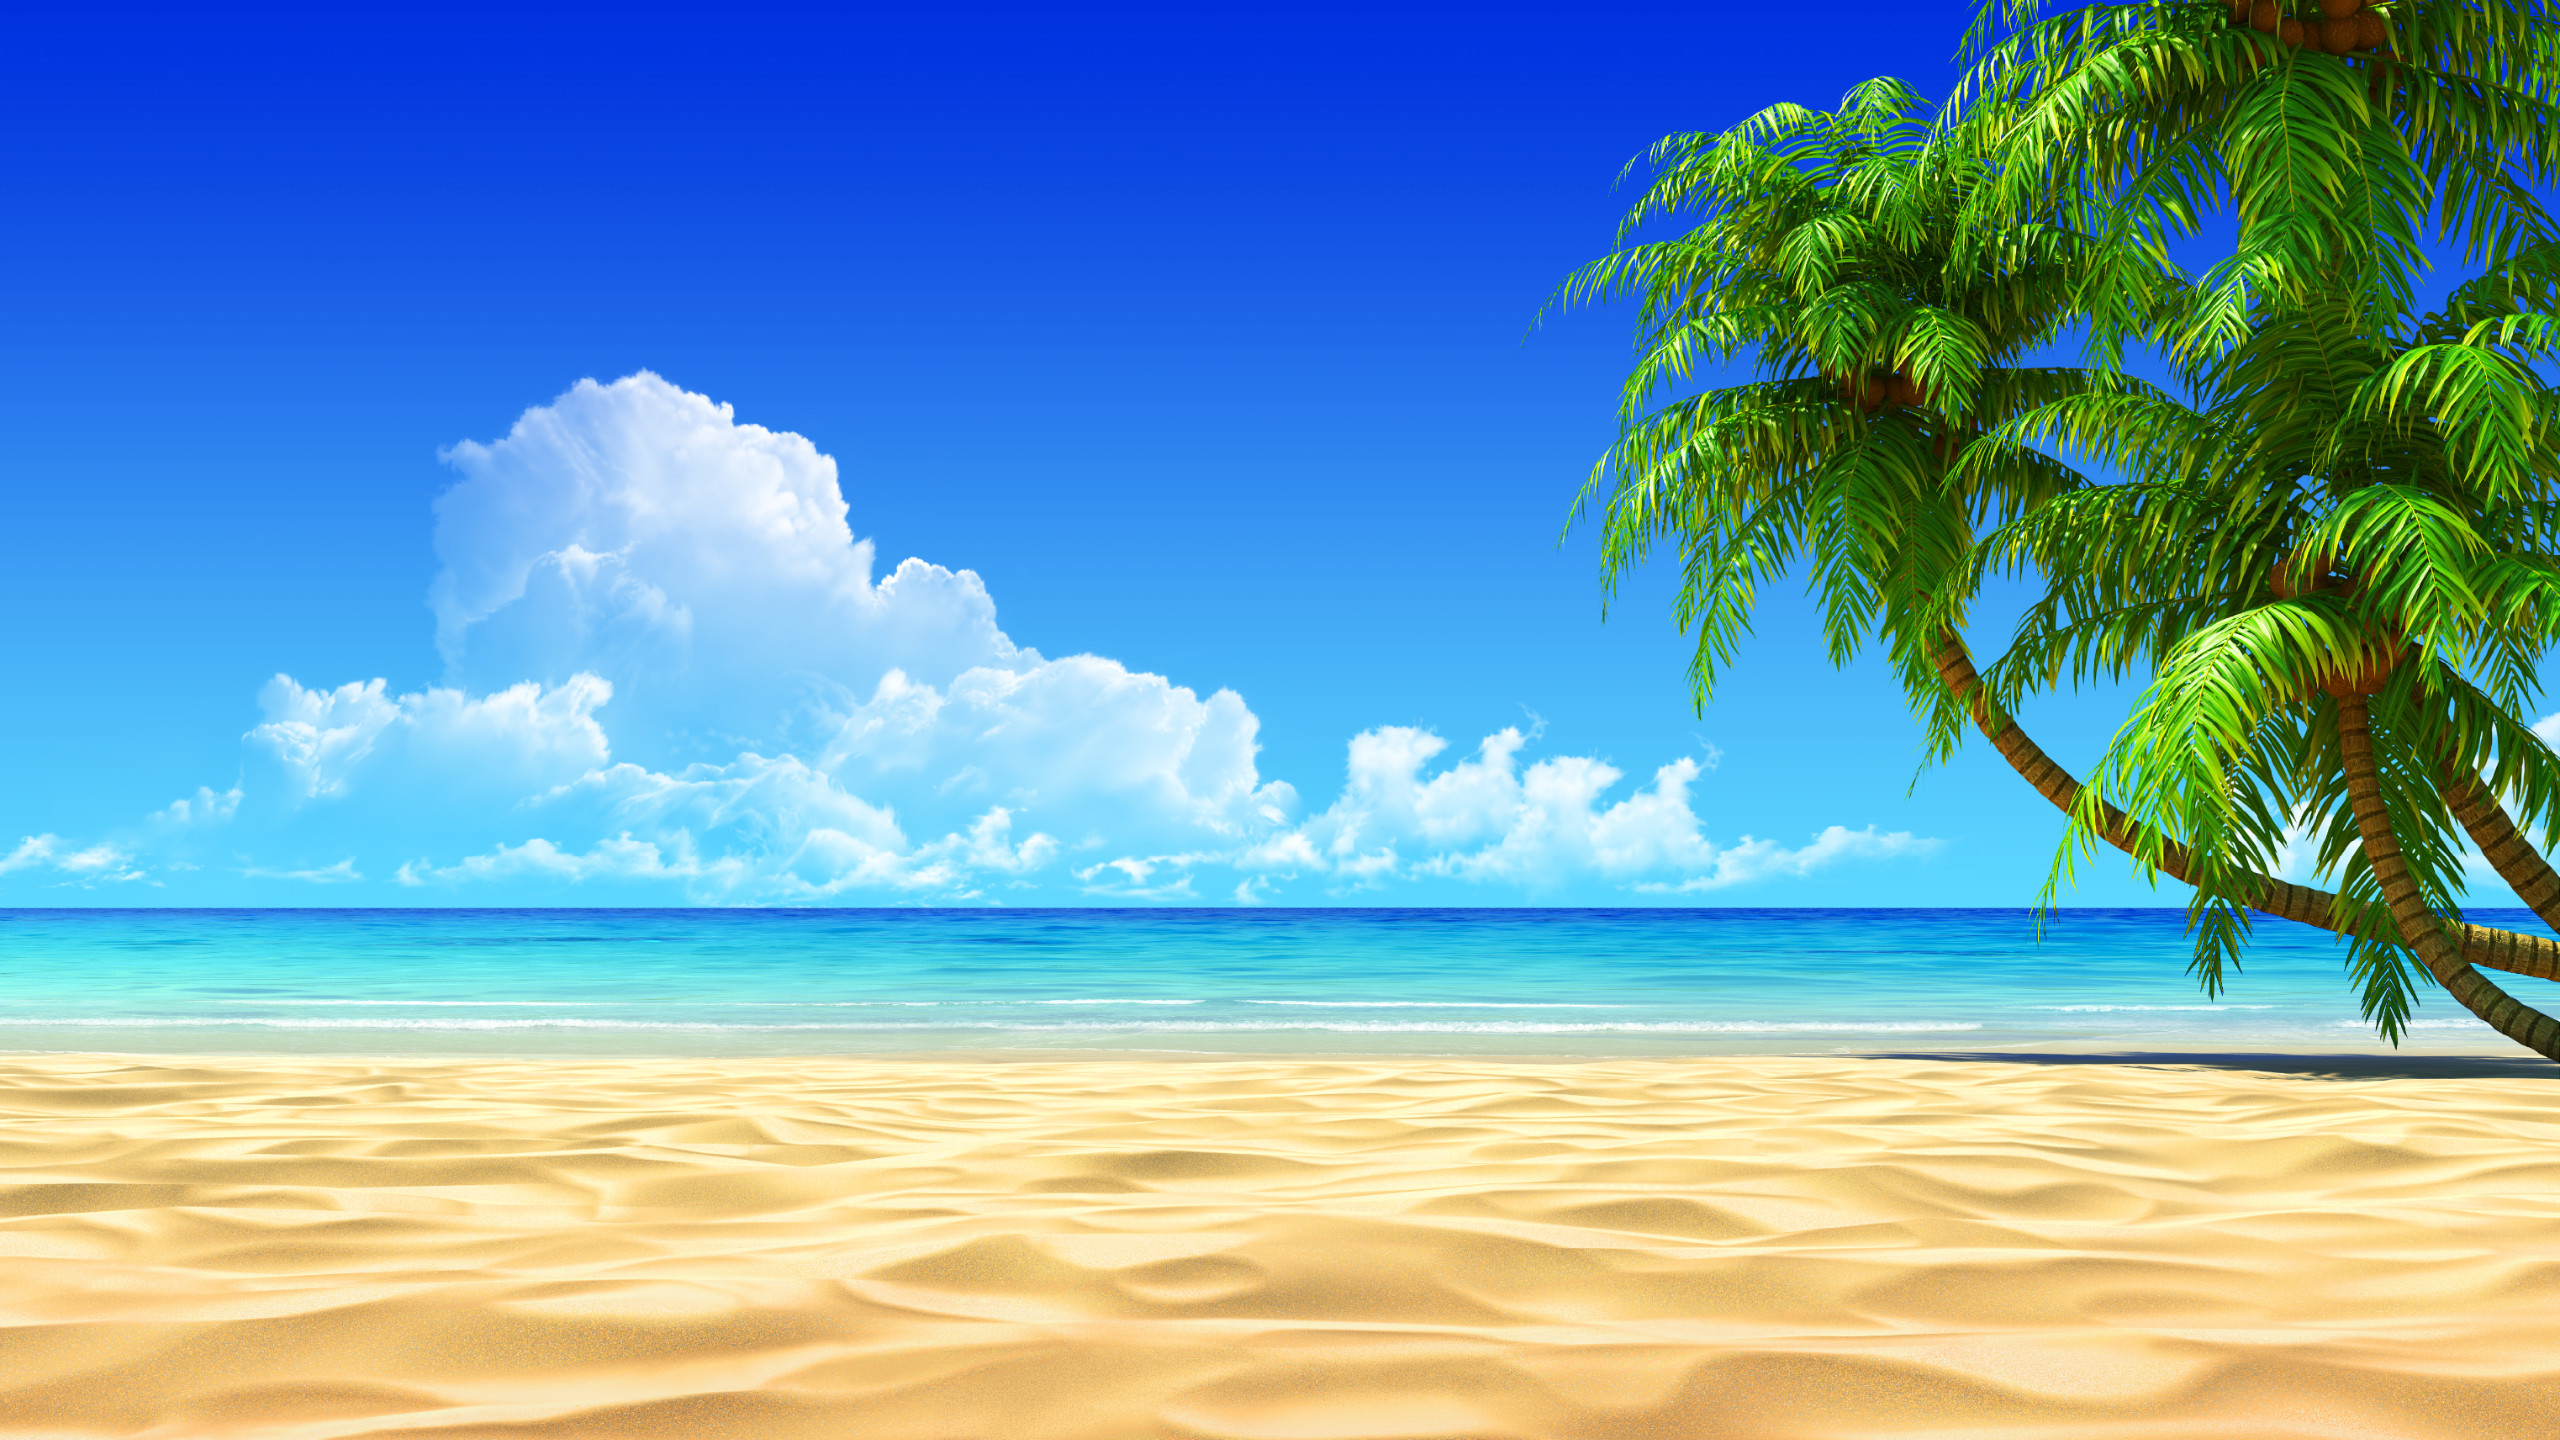 Image for Tropical Beaches With Palm Trees Wallpapers Desktop Background